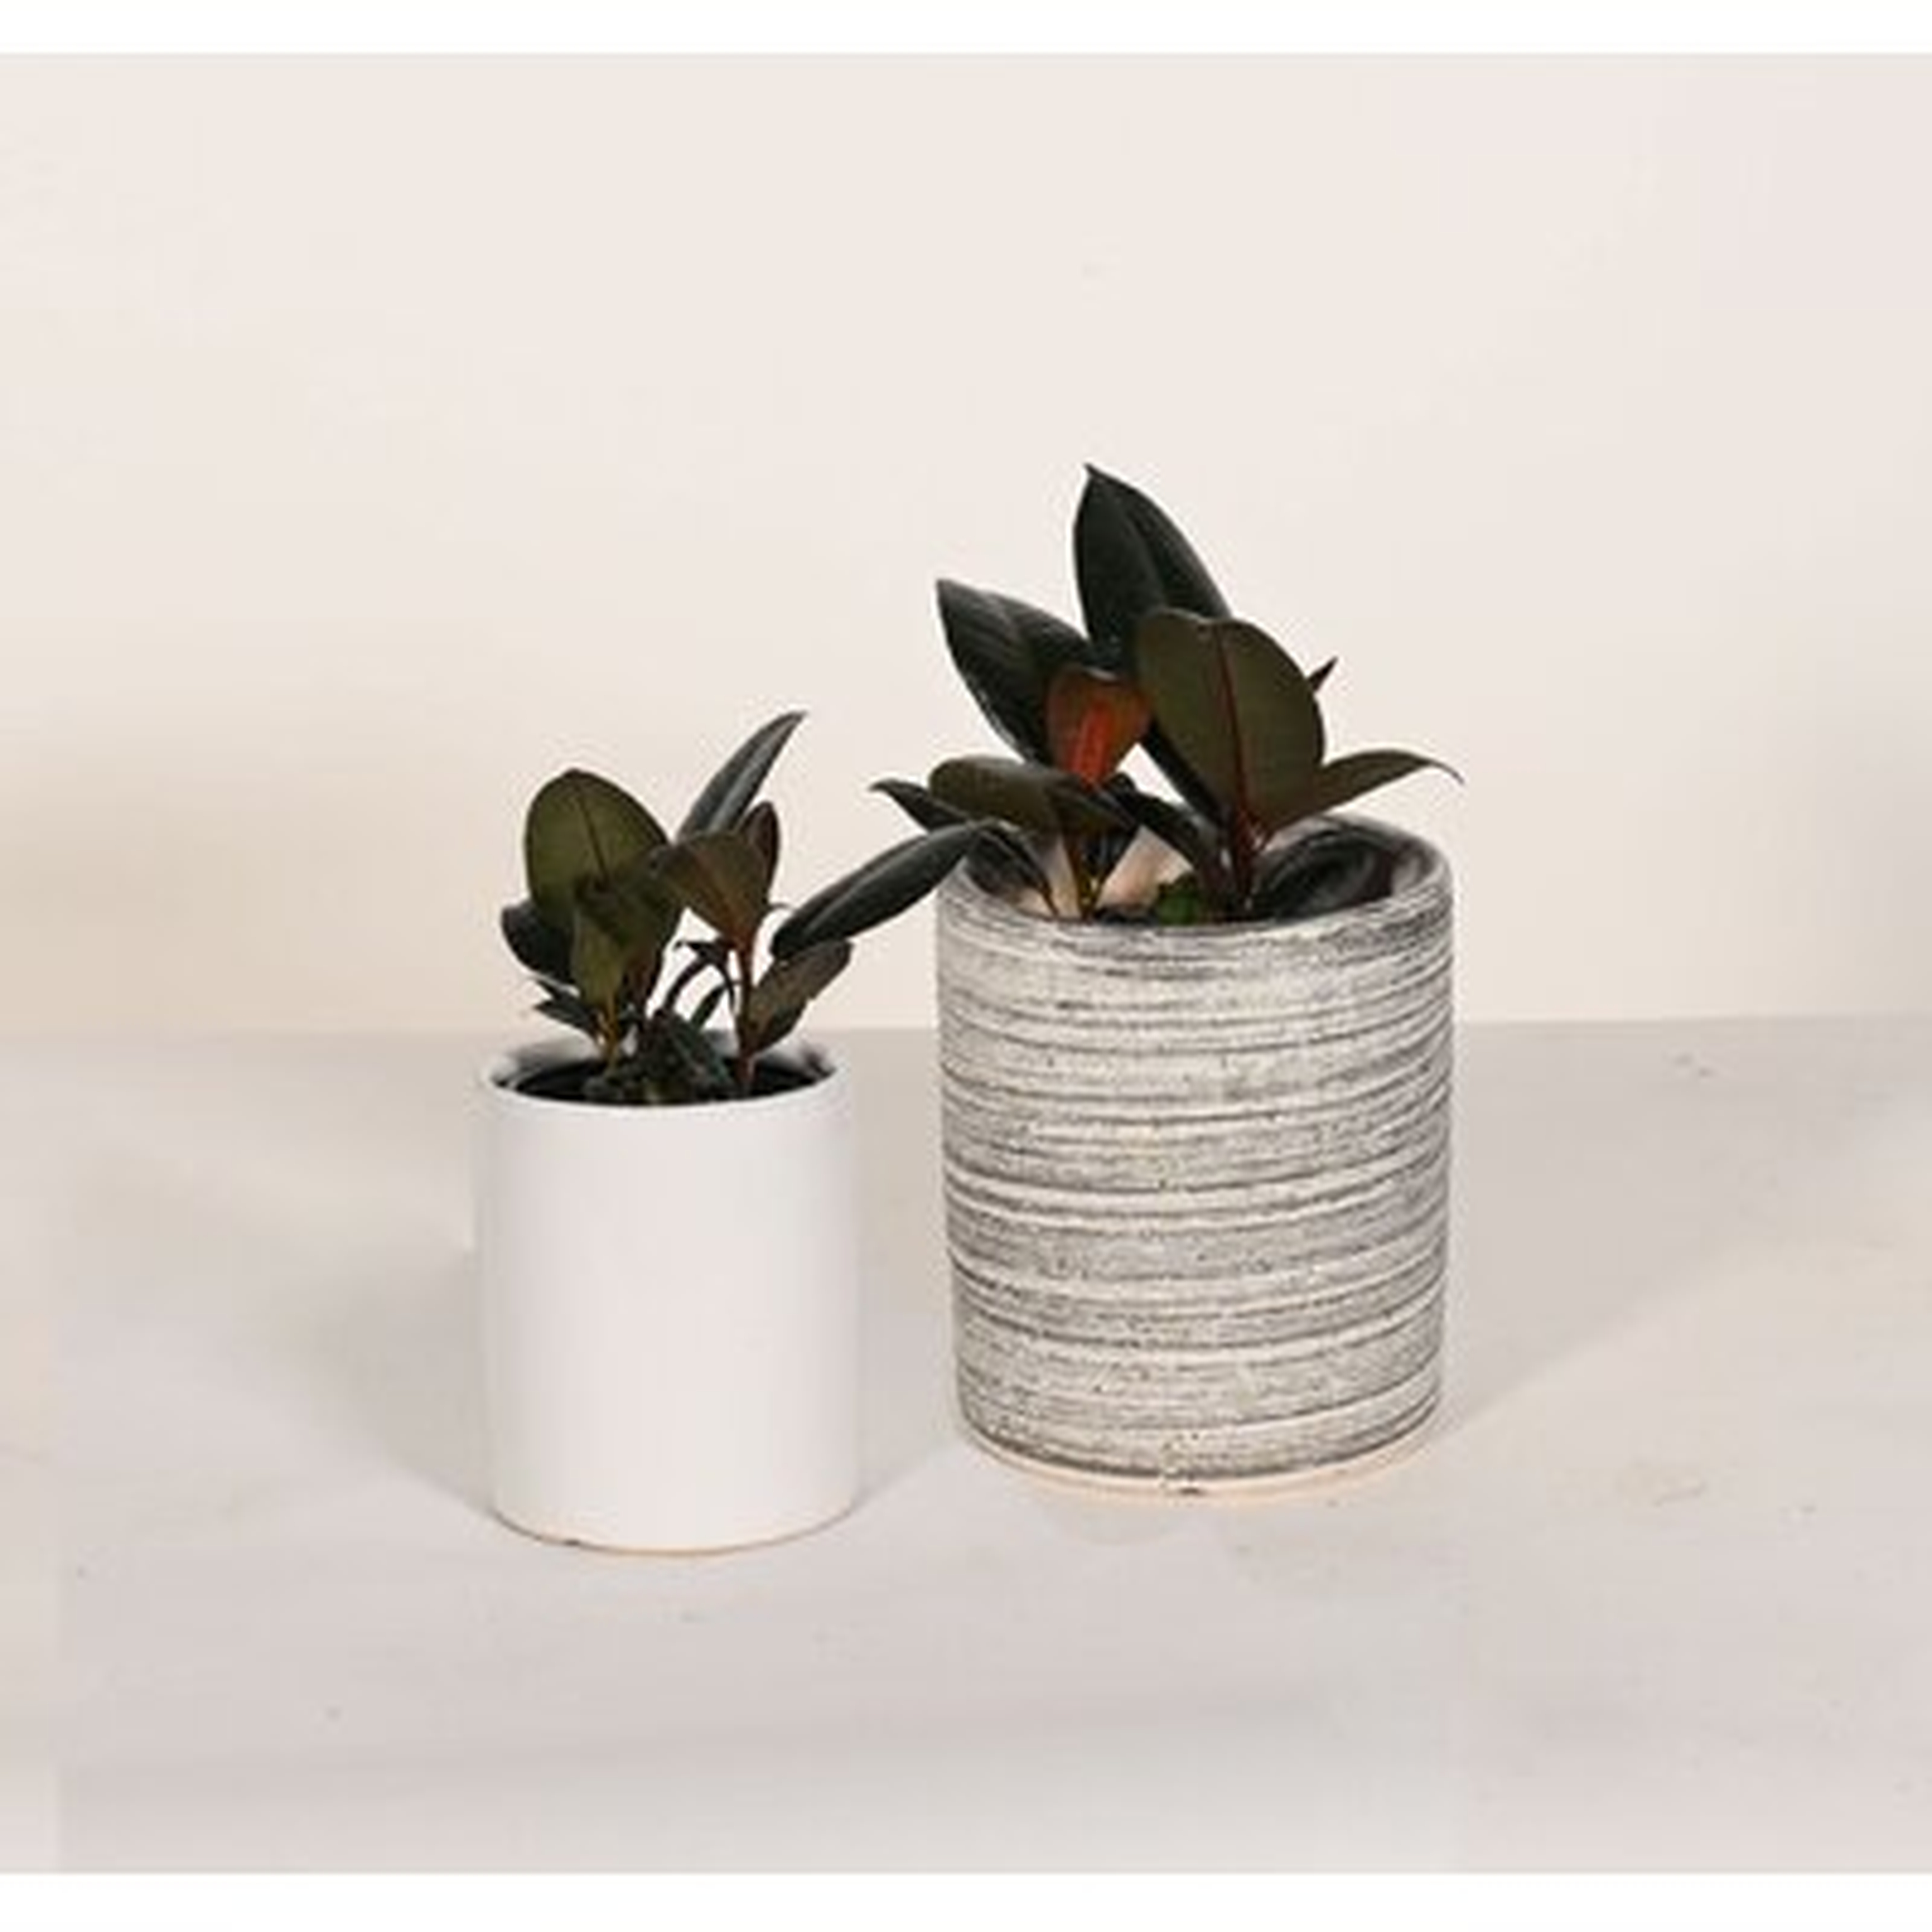 Live Rubber Tree With Ceramic Planter Pots, Gray & White, 5'' & 7'' - Wayfair